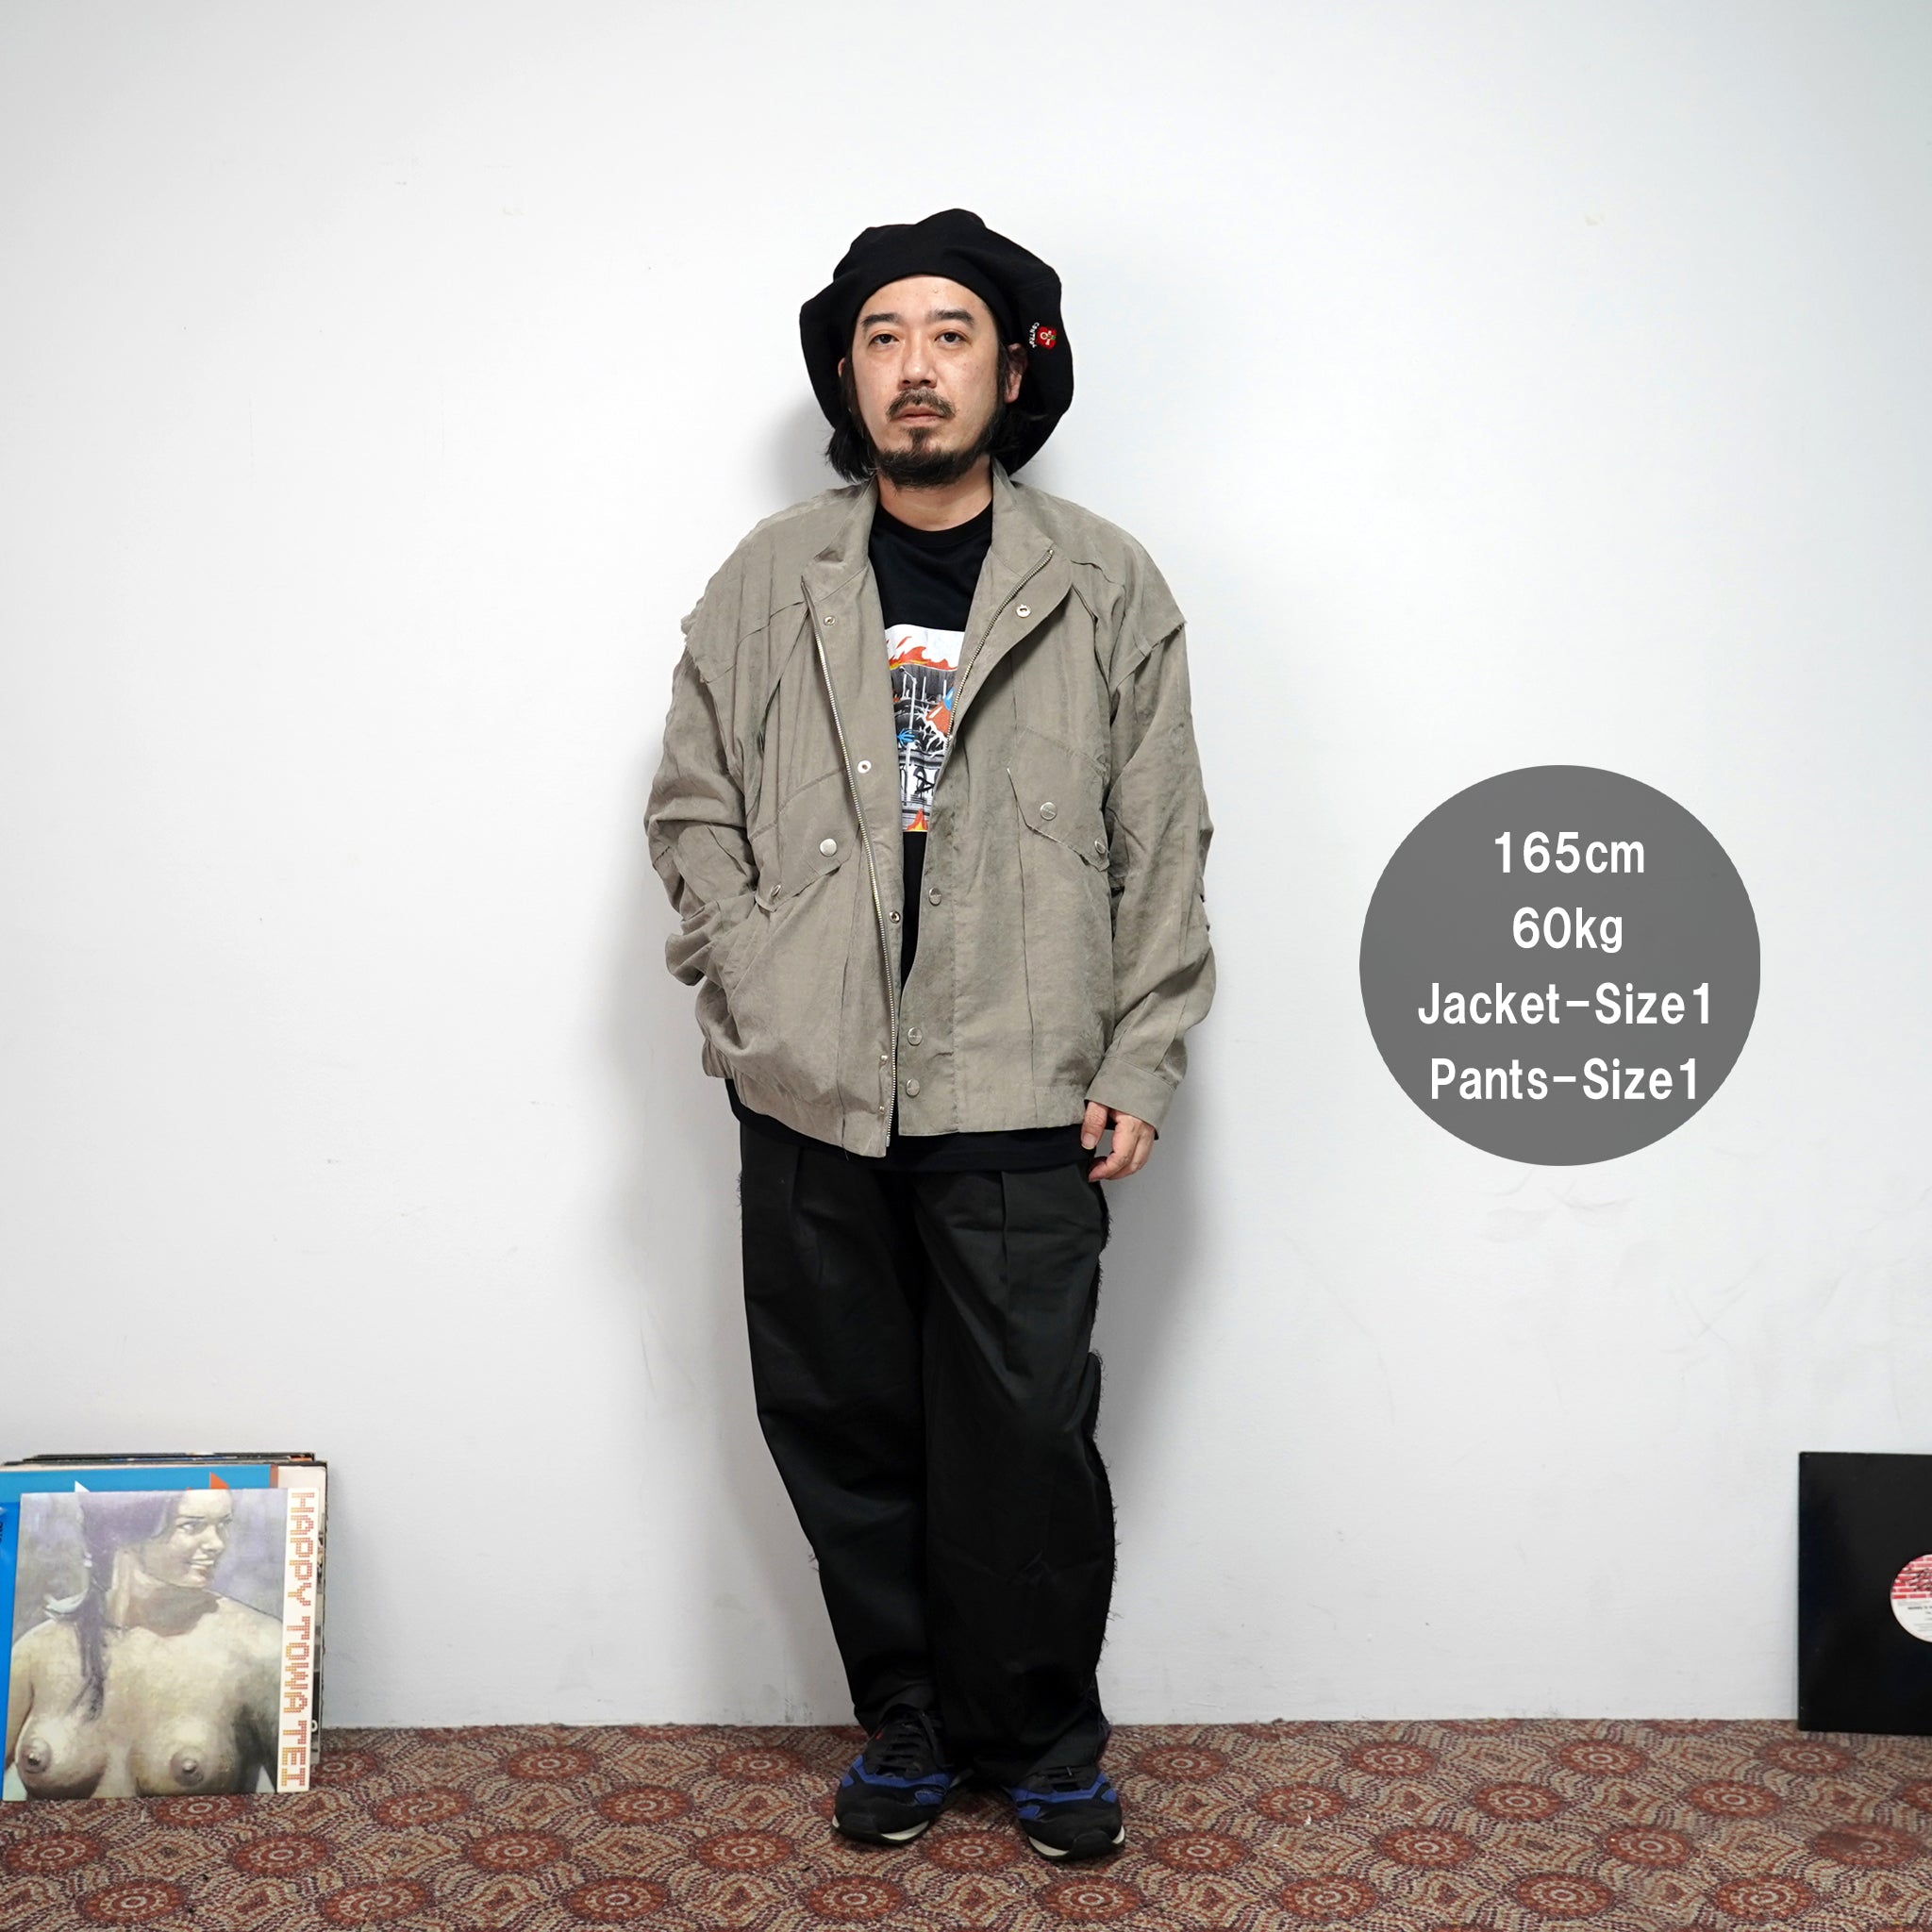 No:PS21J02B | Name:BUTTON JACKET | Color:Stone Washed Blk | Size:1/2【PLATEAU STUDIO_プラトー スタジオ】